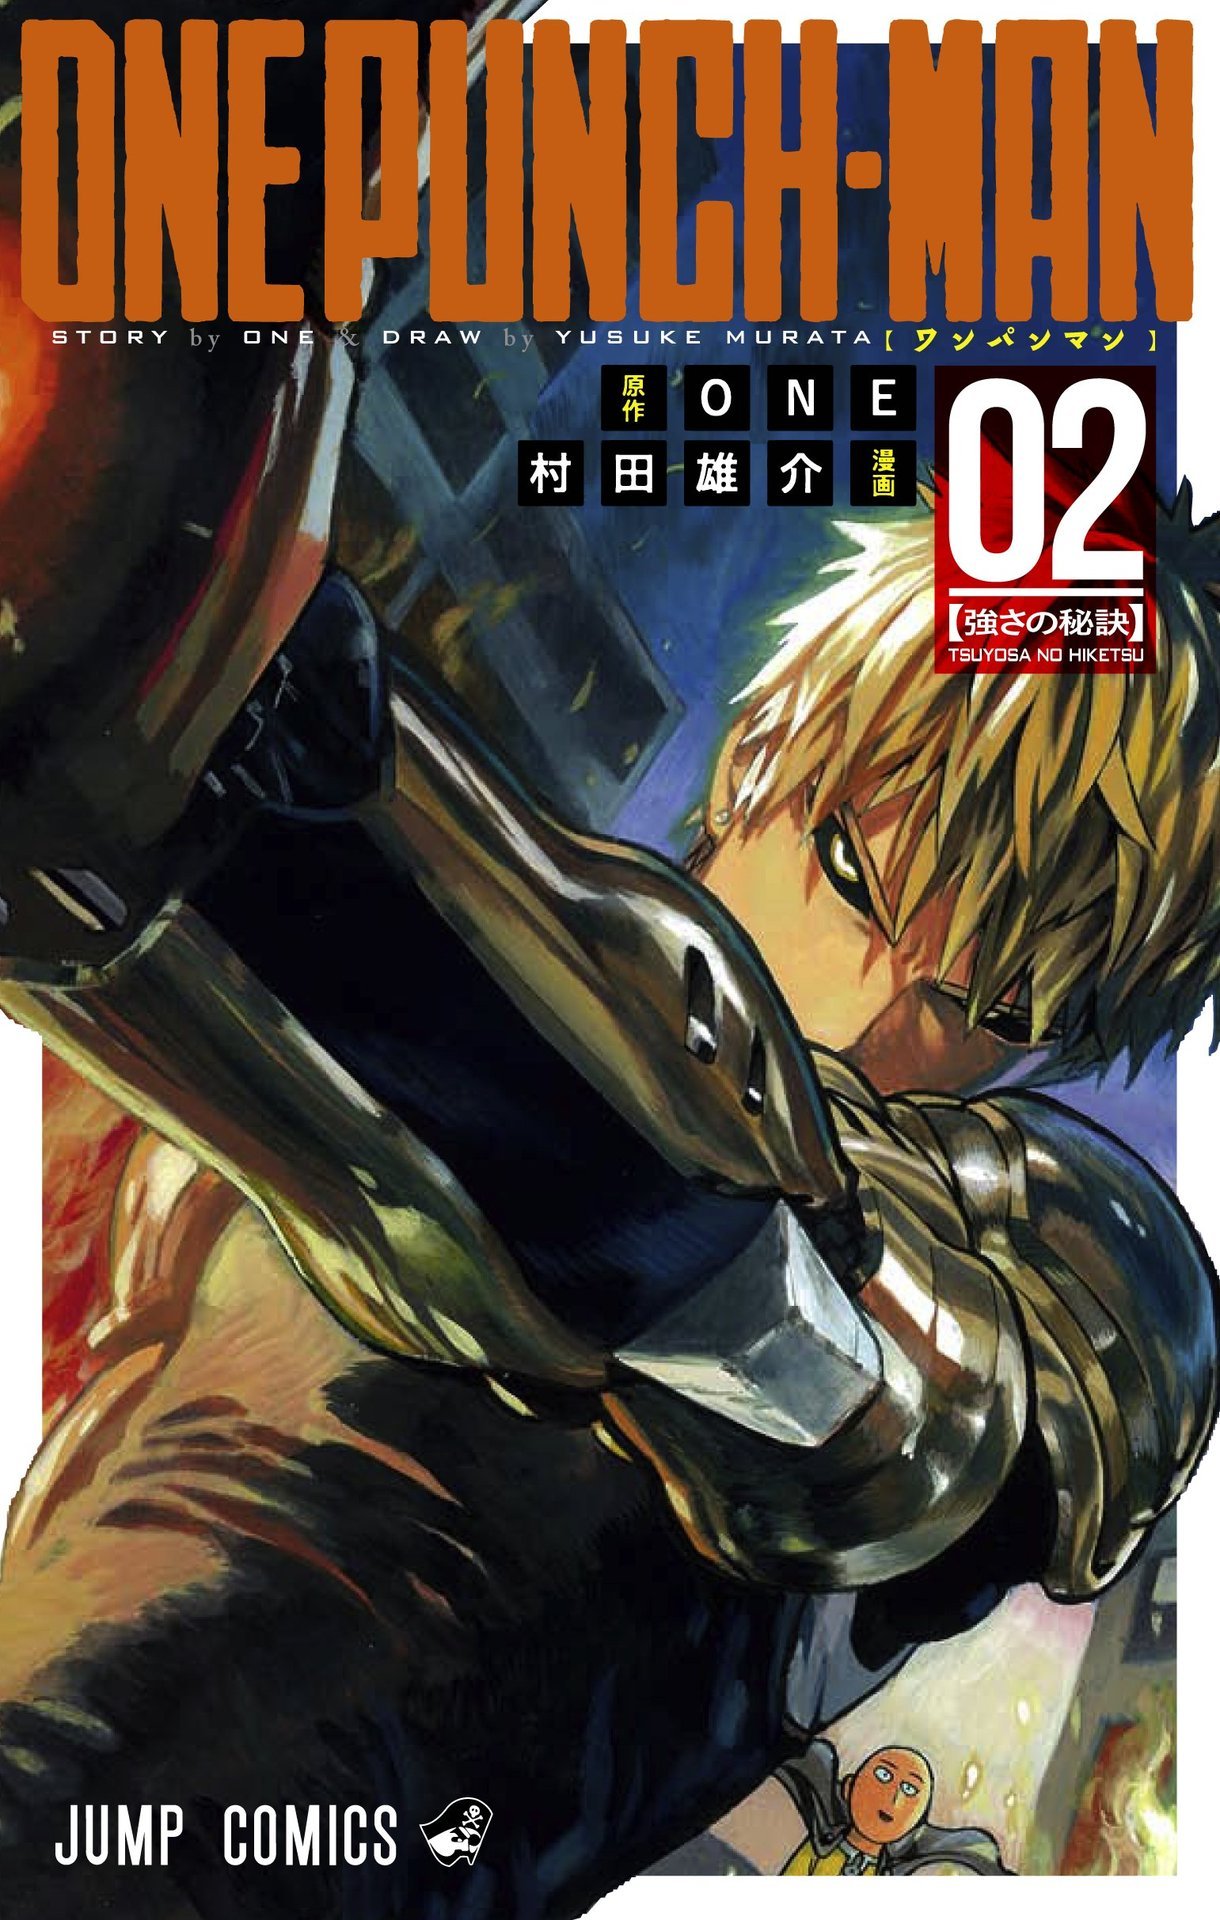 One Punch Man - TV Tropes Forum